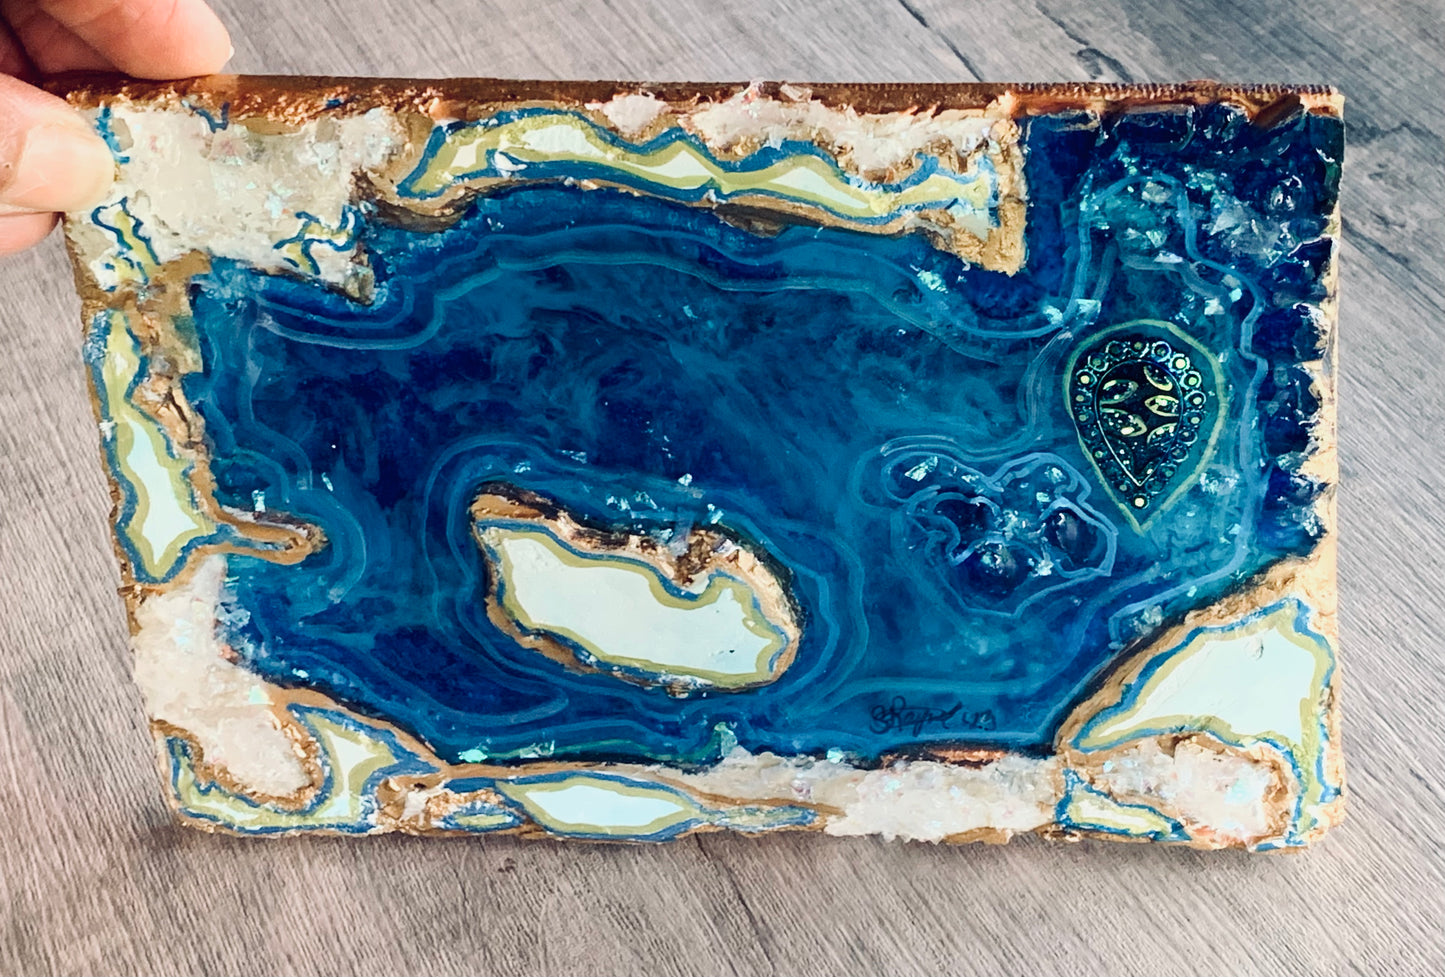 "By The Bay" 5"x7" Mixed Media Crystal and Resin Art by Sharmaine Rayner